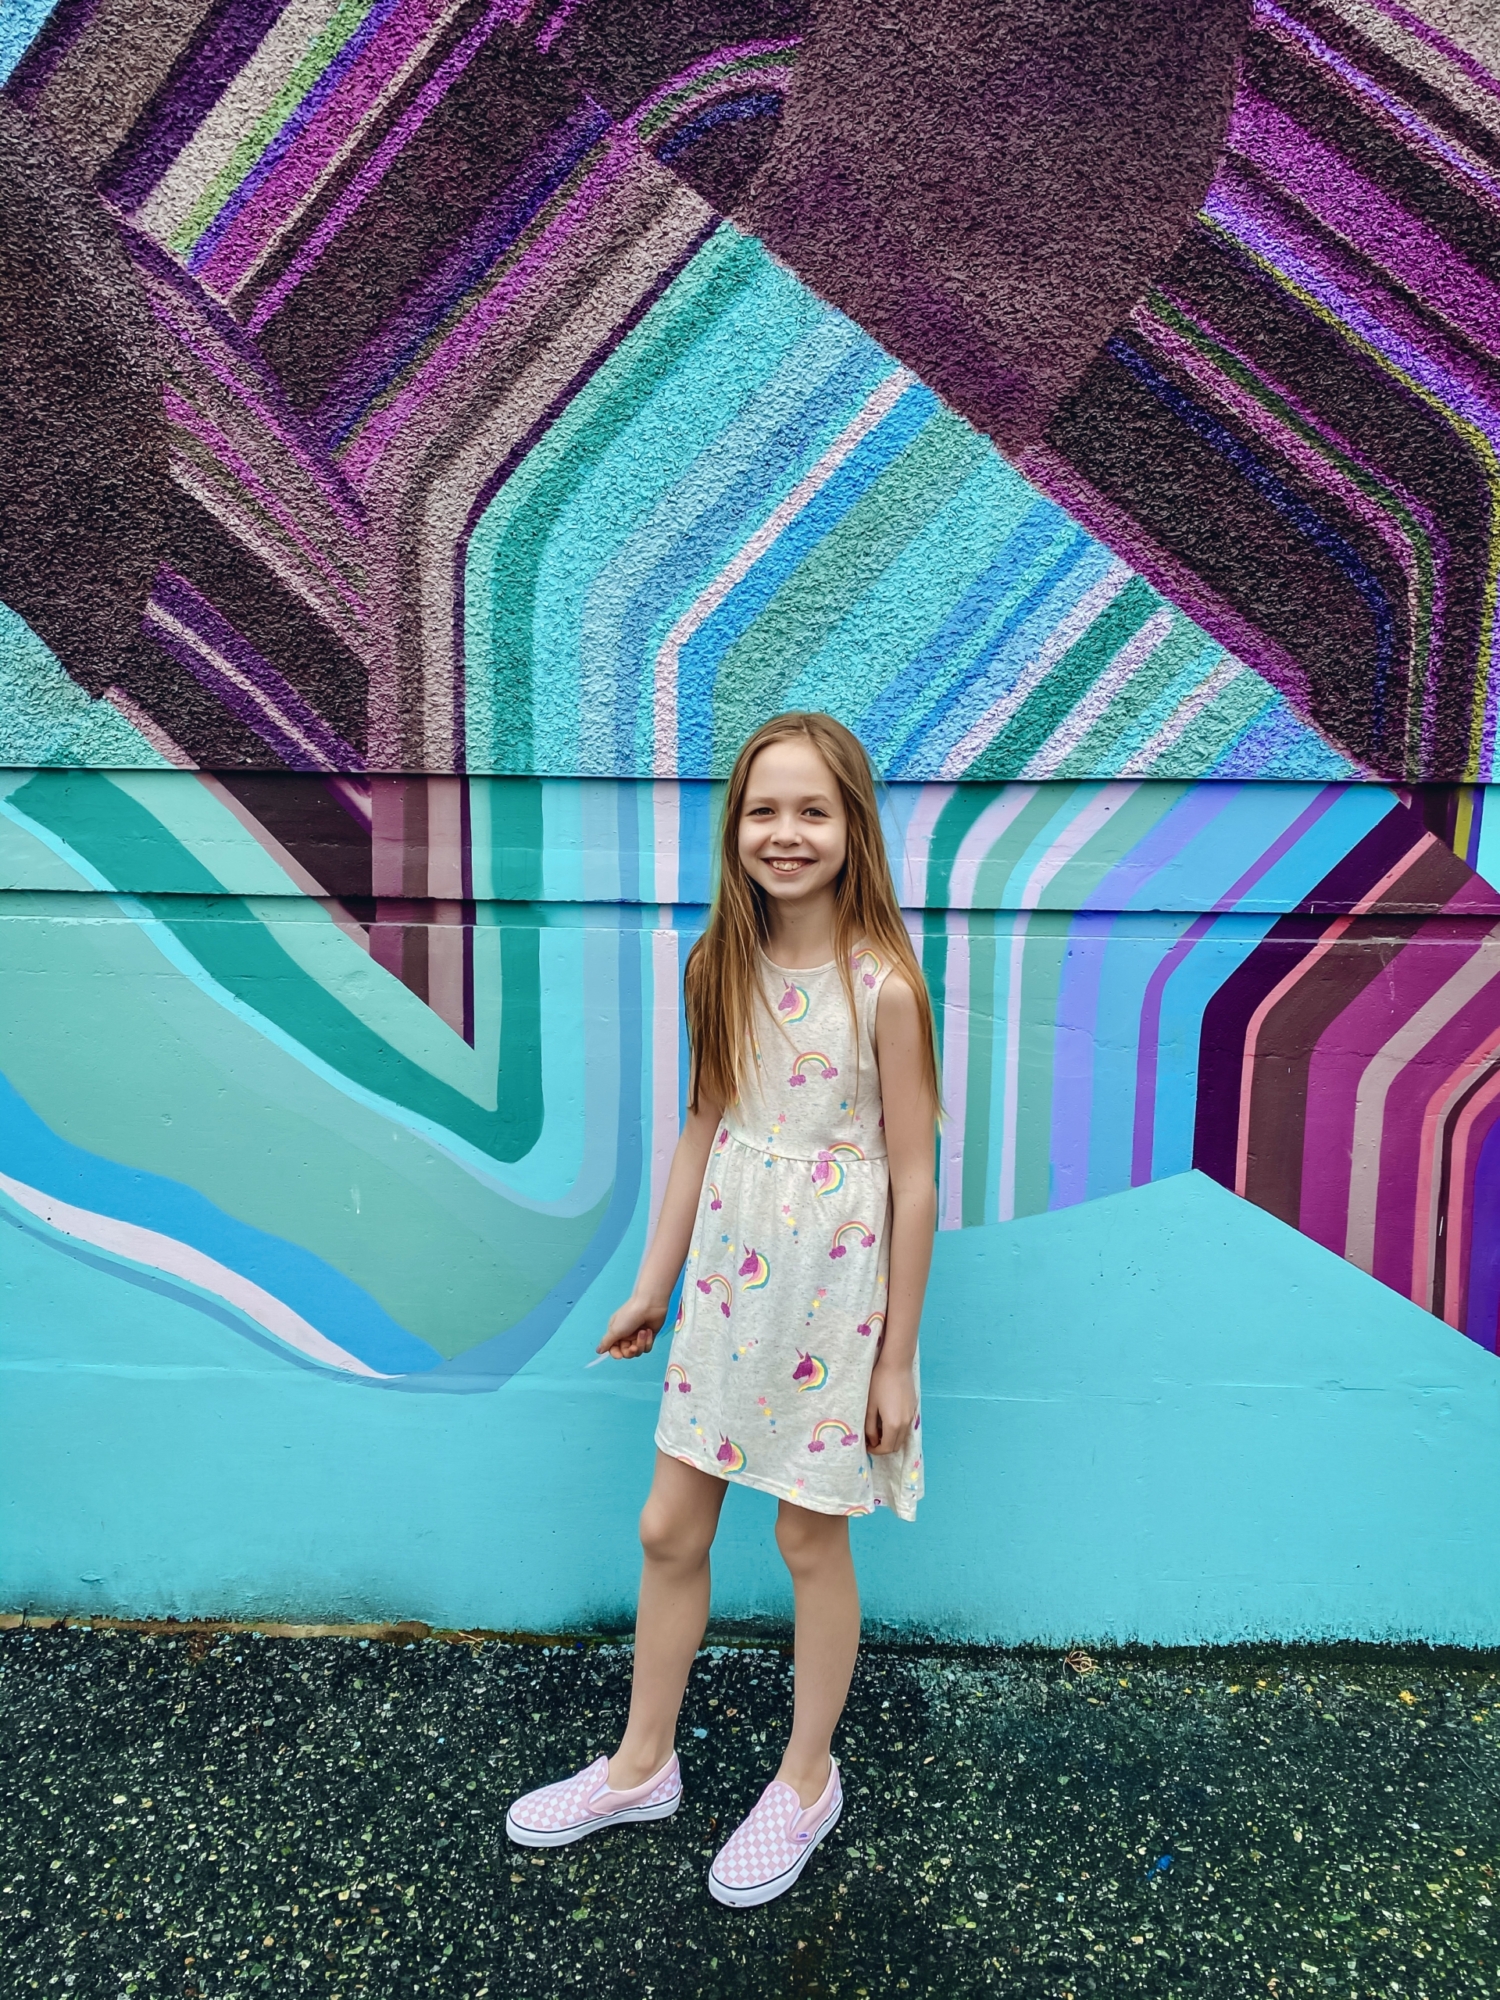 Instagrammable Walls in Vancouver